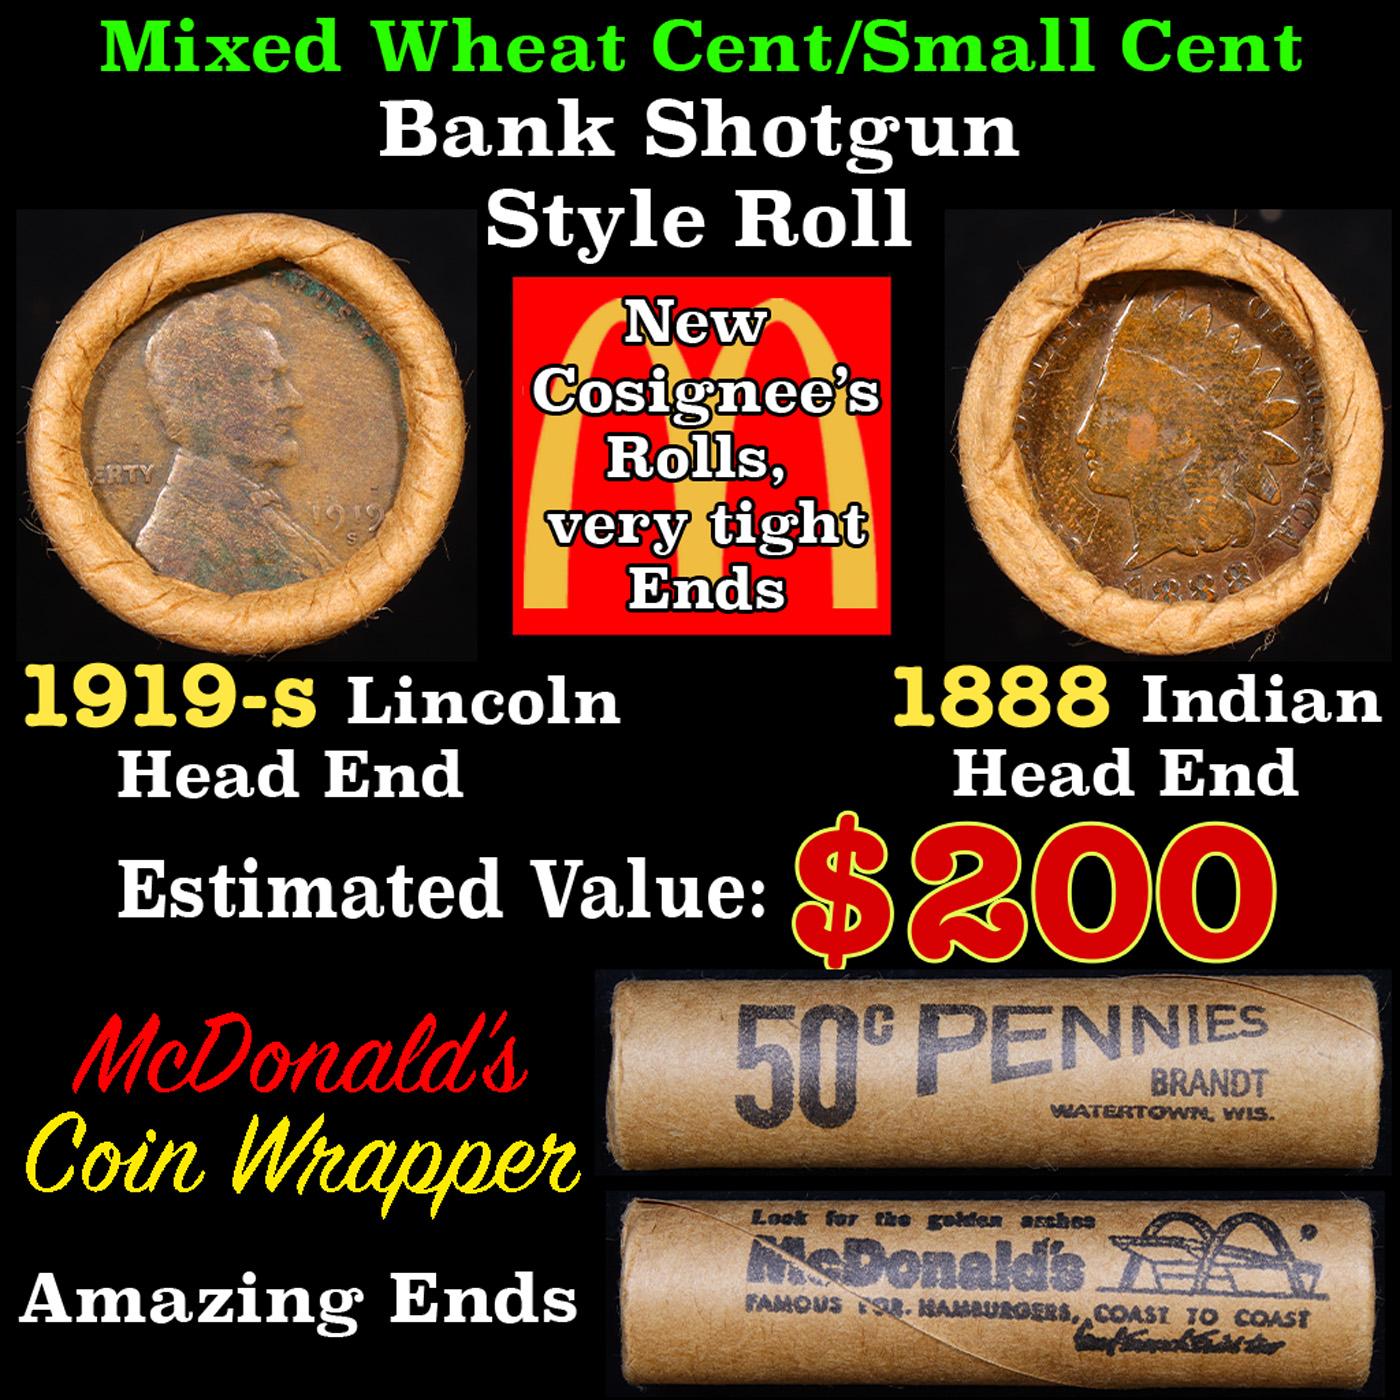 Mixed small cents 1c orig shotgun Bandt McDonalds roll, 1919-s Wheat Cent, 1888 Indian Cent other en